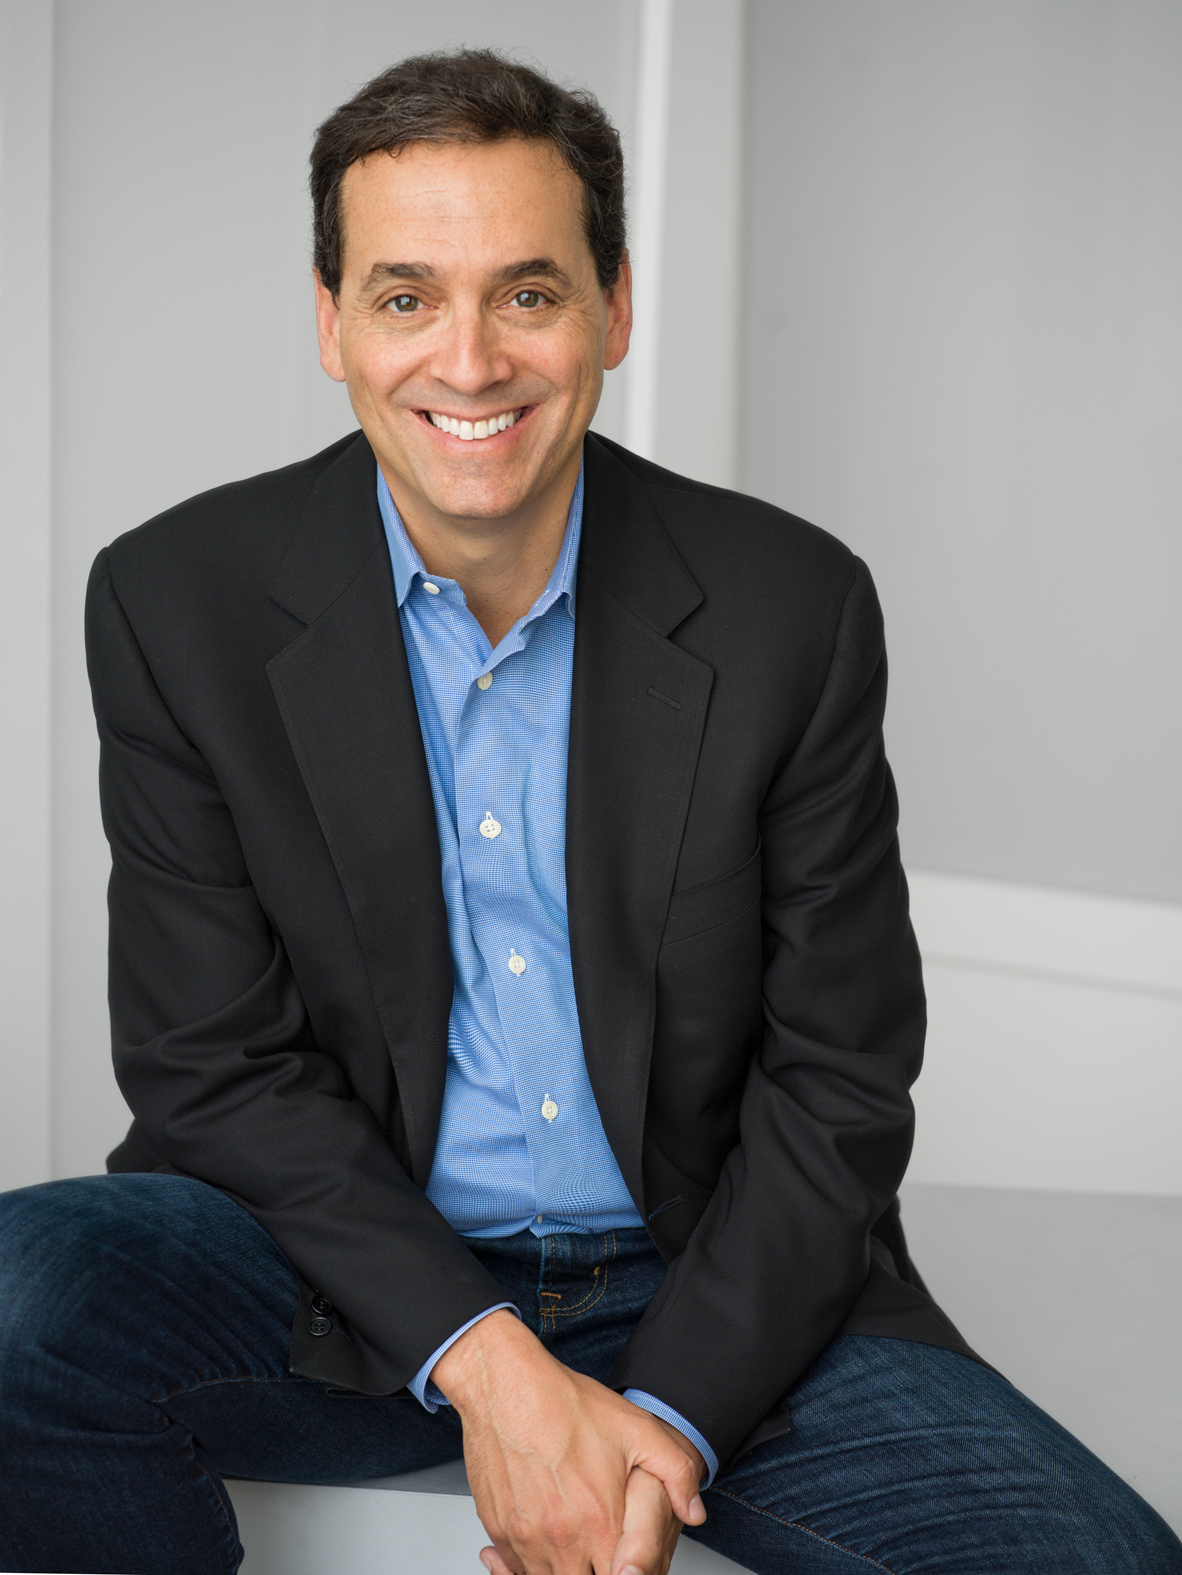 Daniel H. Pink, #1 New York Times bestselling author of WHEN, DRIVE, and TO SELL IS HUMAN"